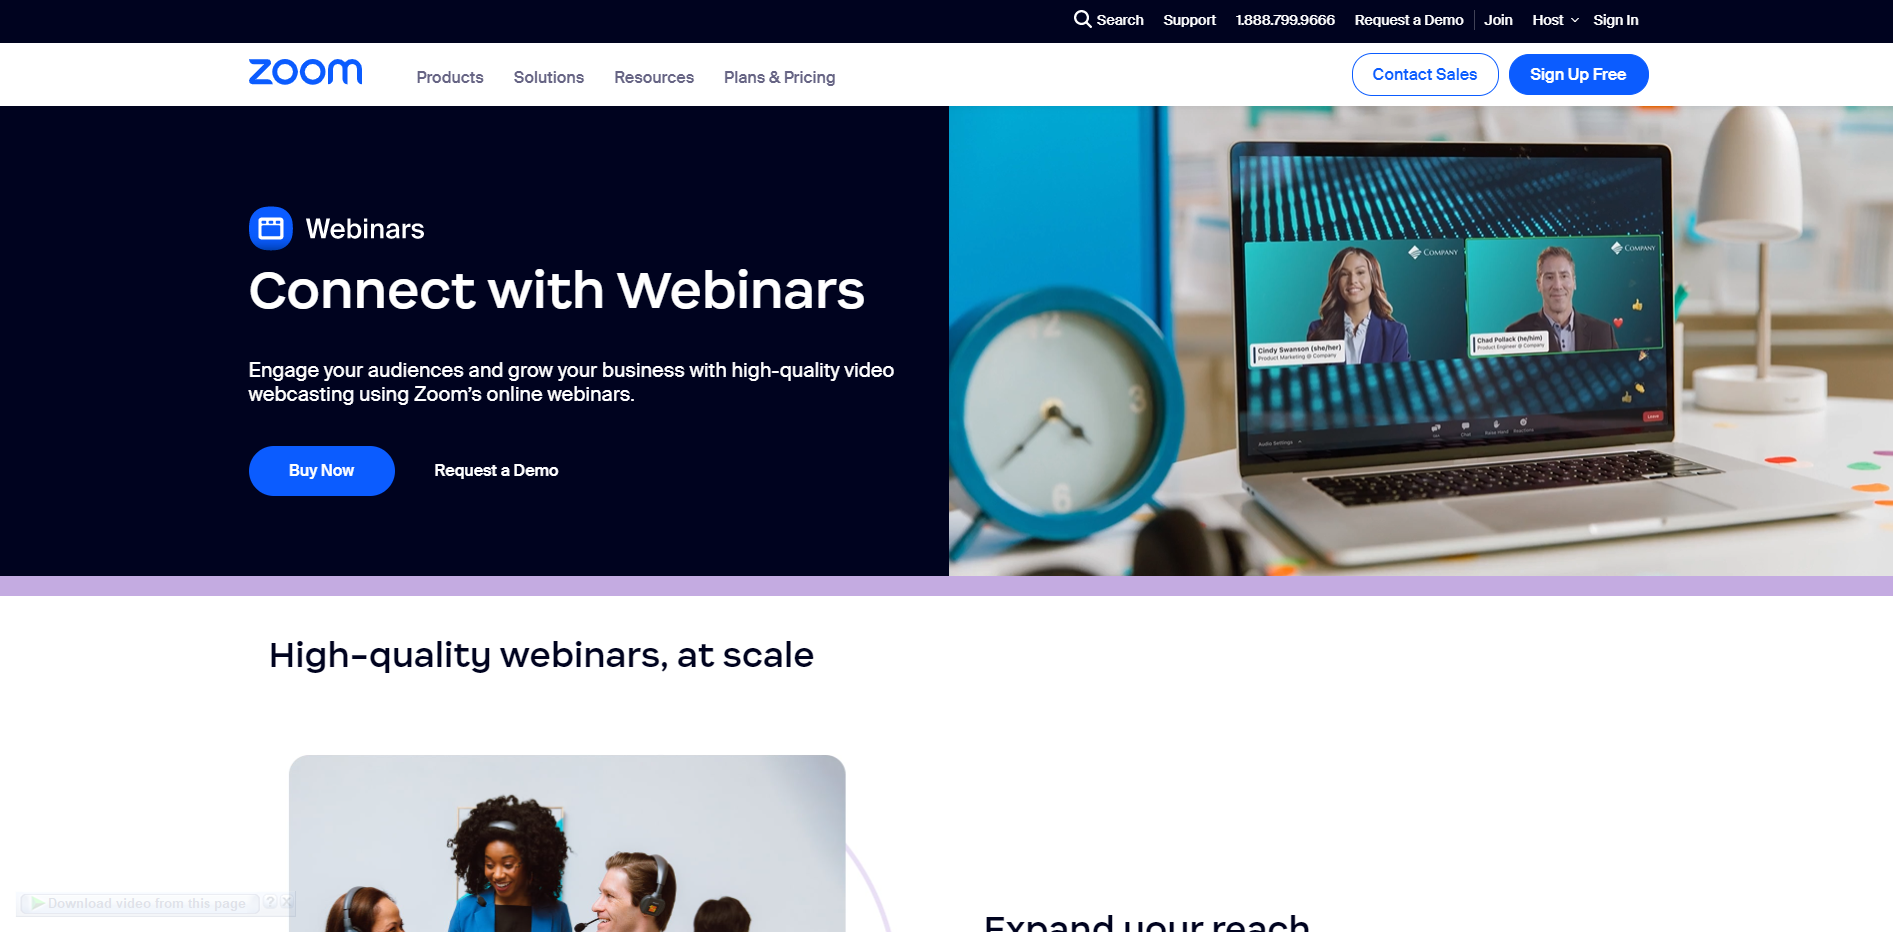 Zoom Events and Webinars 0